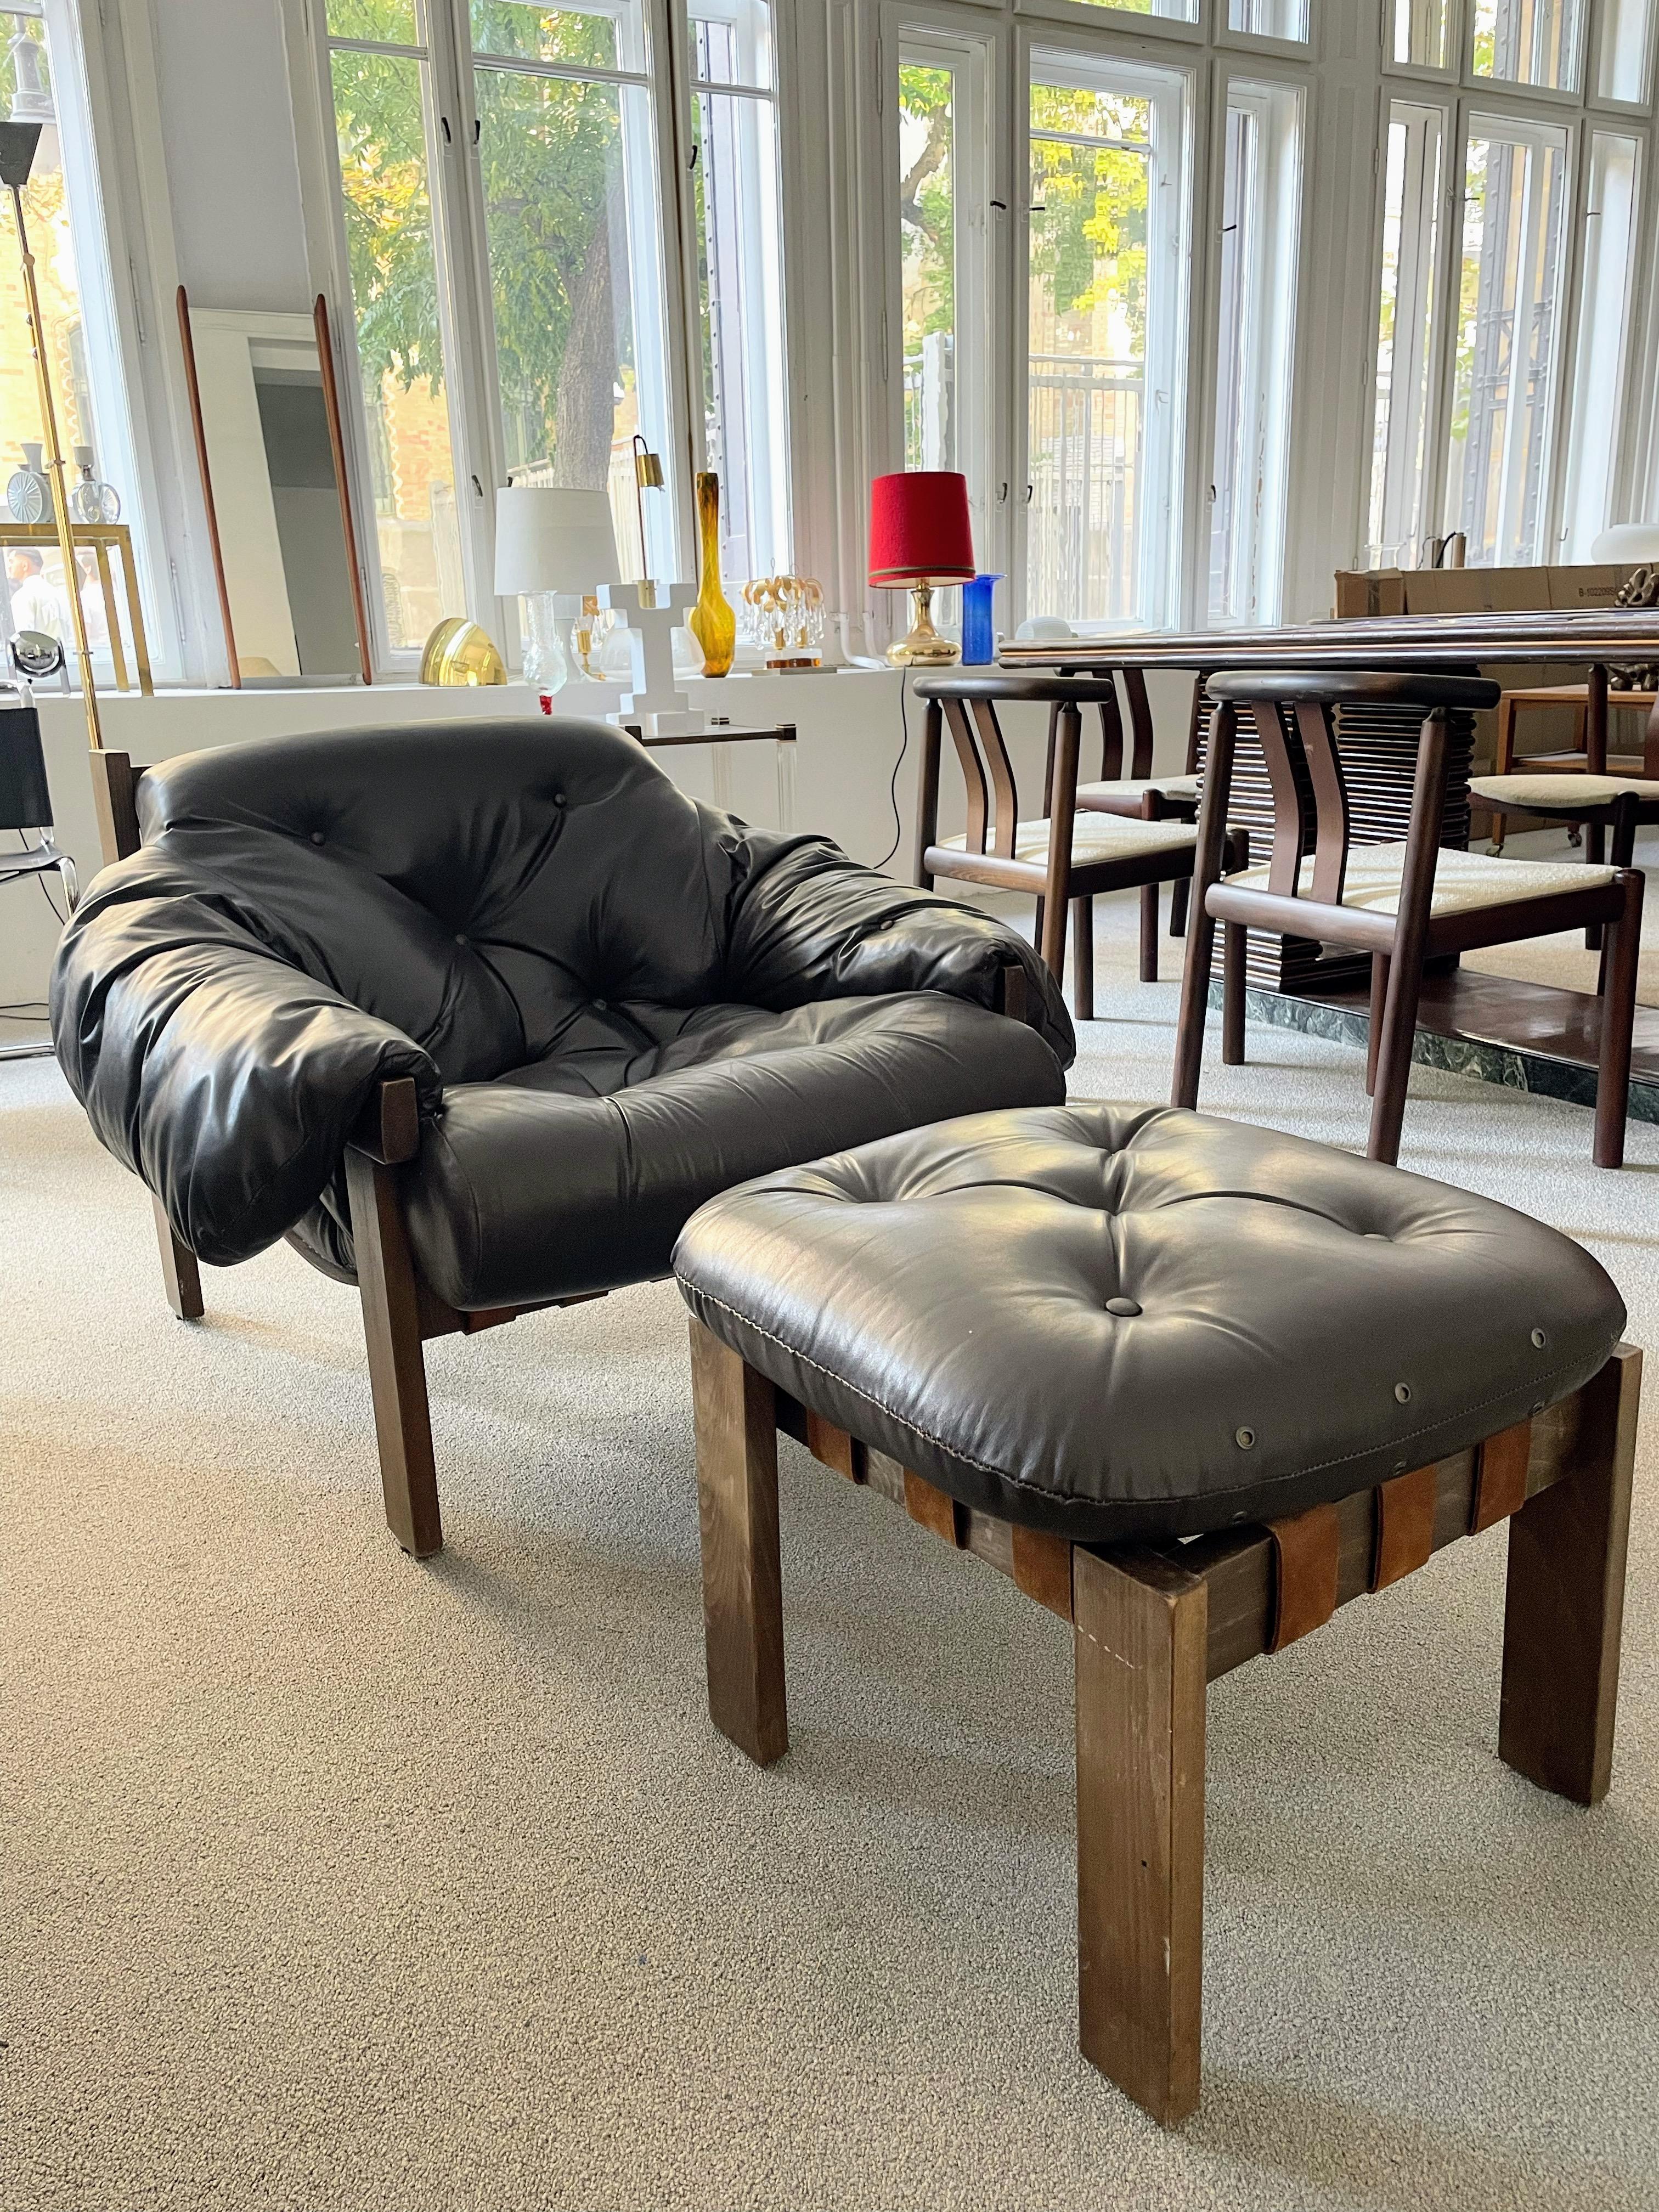 Stunning tufted leather armchair and ottoman in manner of Brazilian designer Percival Lafer. 
Featuring a solid wood frame with beautiful grain that supports the natural leather straps which the tufted dark brown leather cushion rests on. 
The